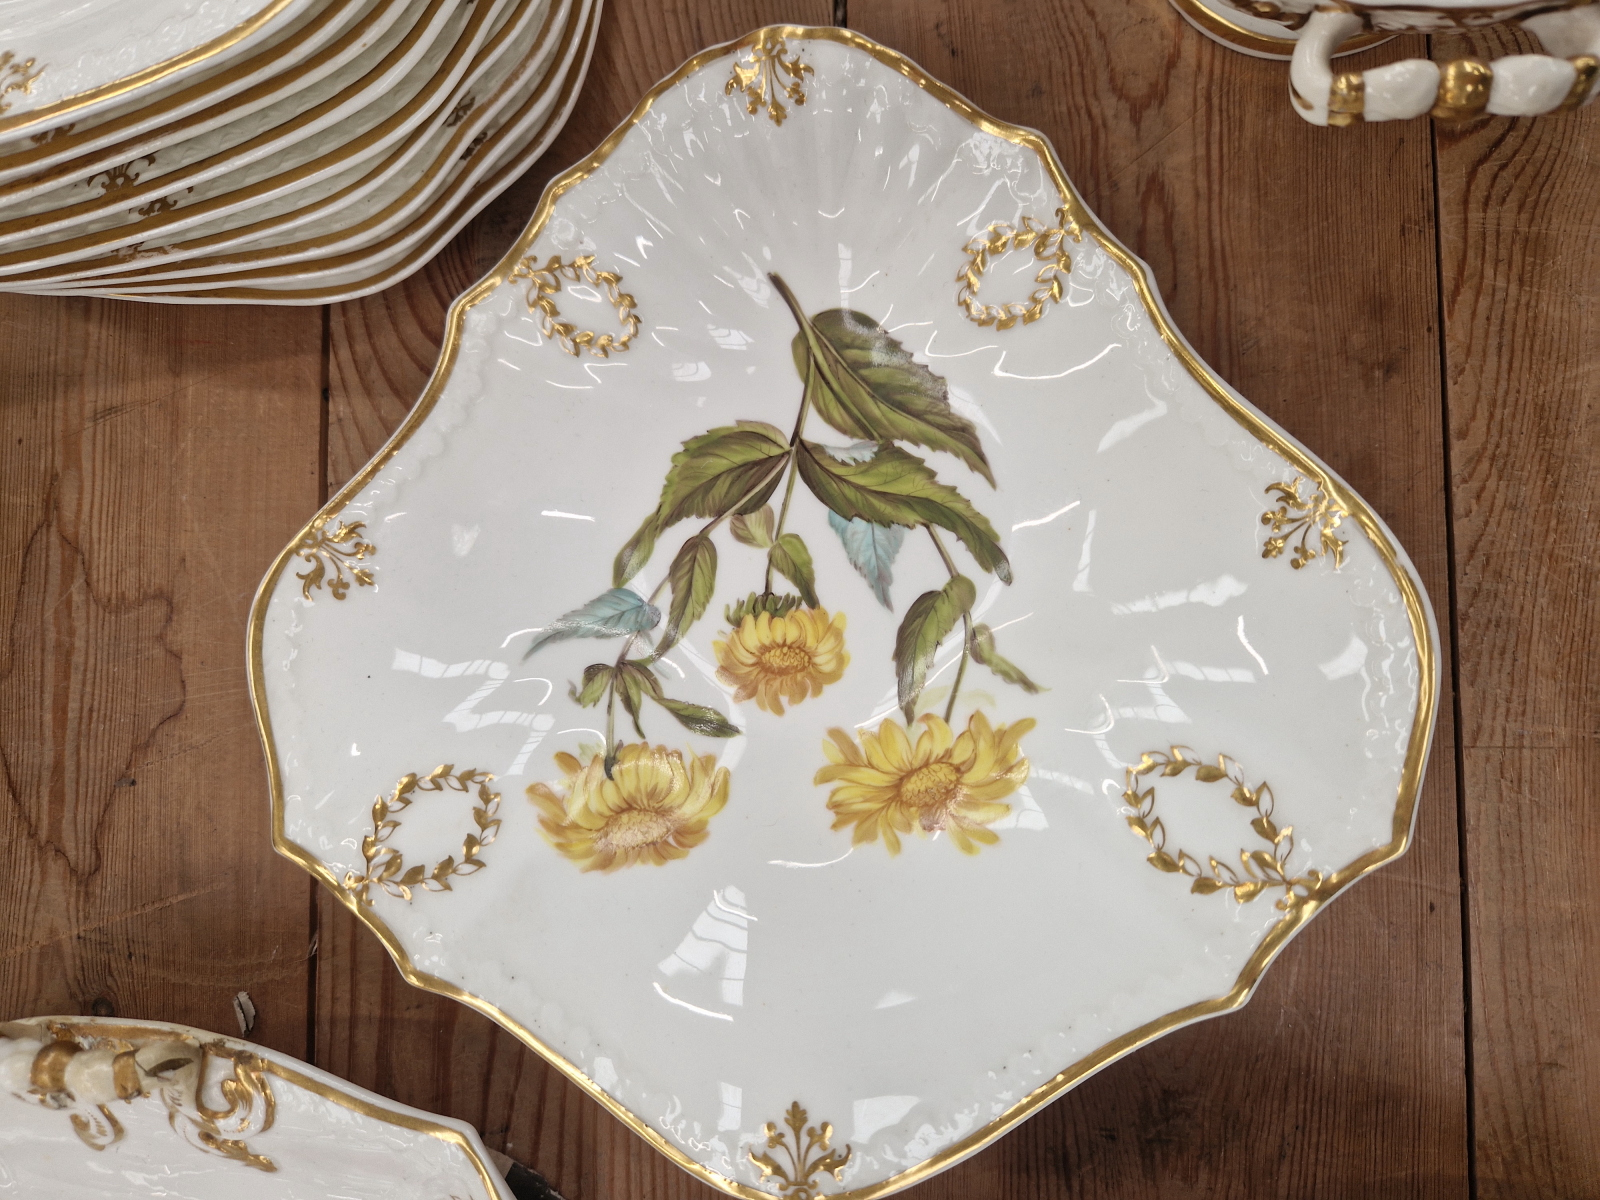 A FINE EARLY 19th C. PORCELAIN DESSERT SERVICE, HAND PAINTED WITH NAMED FLORAL BOTANICAL SPECIMENS - Image 11 of 58